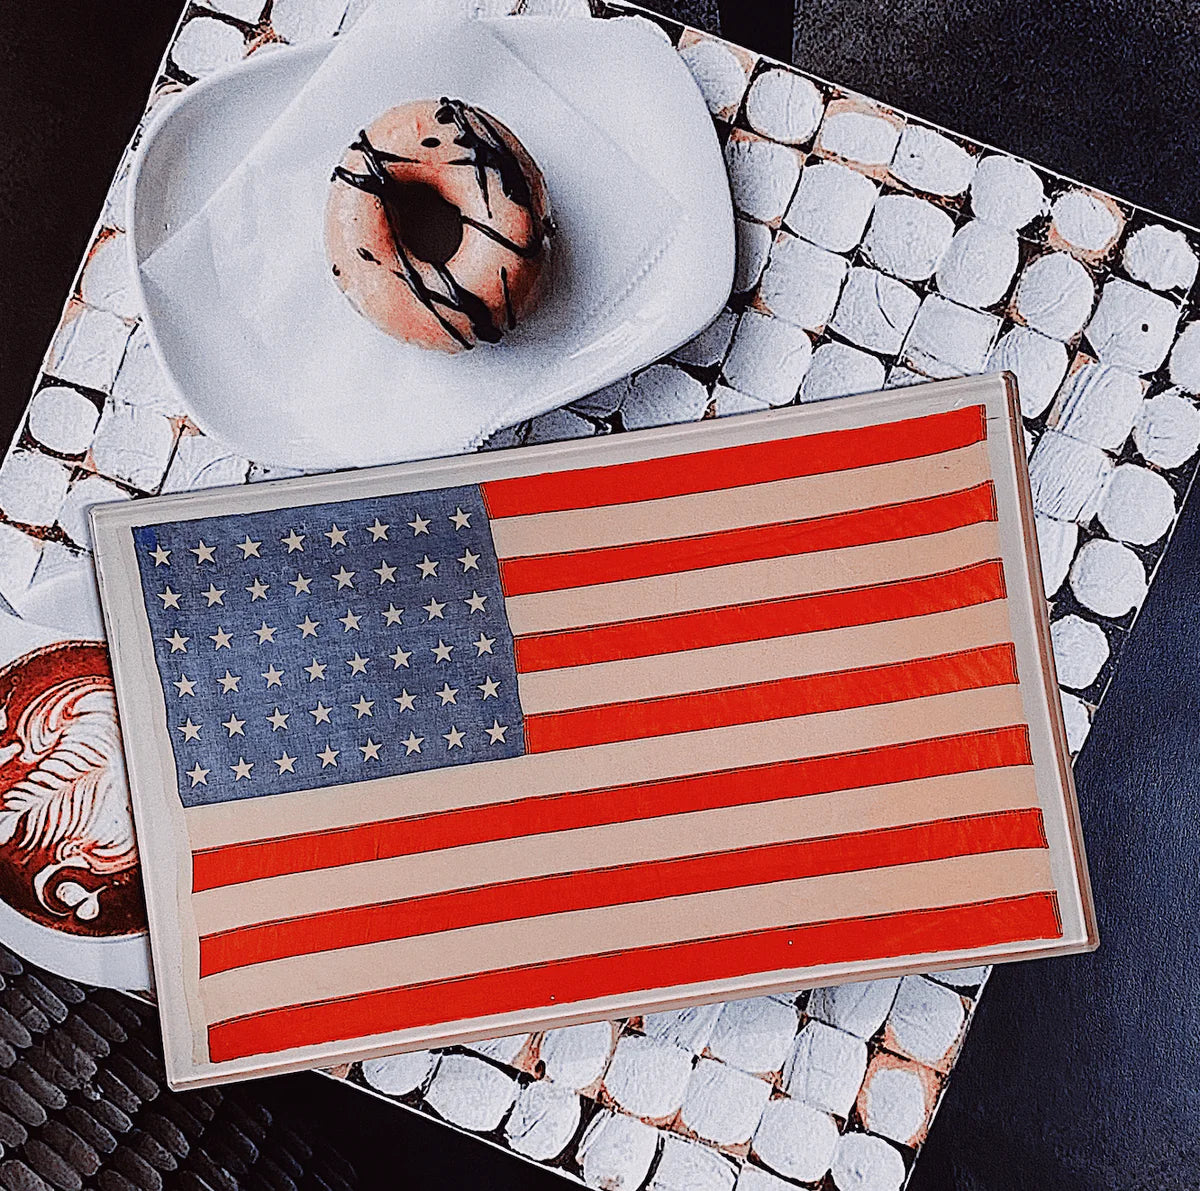 An artistic interpretation of the American flag on a Ben&#39;s Garden 5.5&quot; x 8.5&quot; tray, placed on a mosaic tiled surface in a Scottsdale, Arizona bungalow next to a white hat with a floral design.